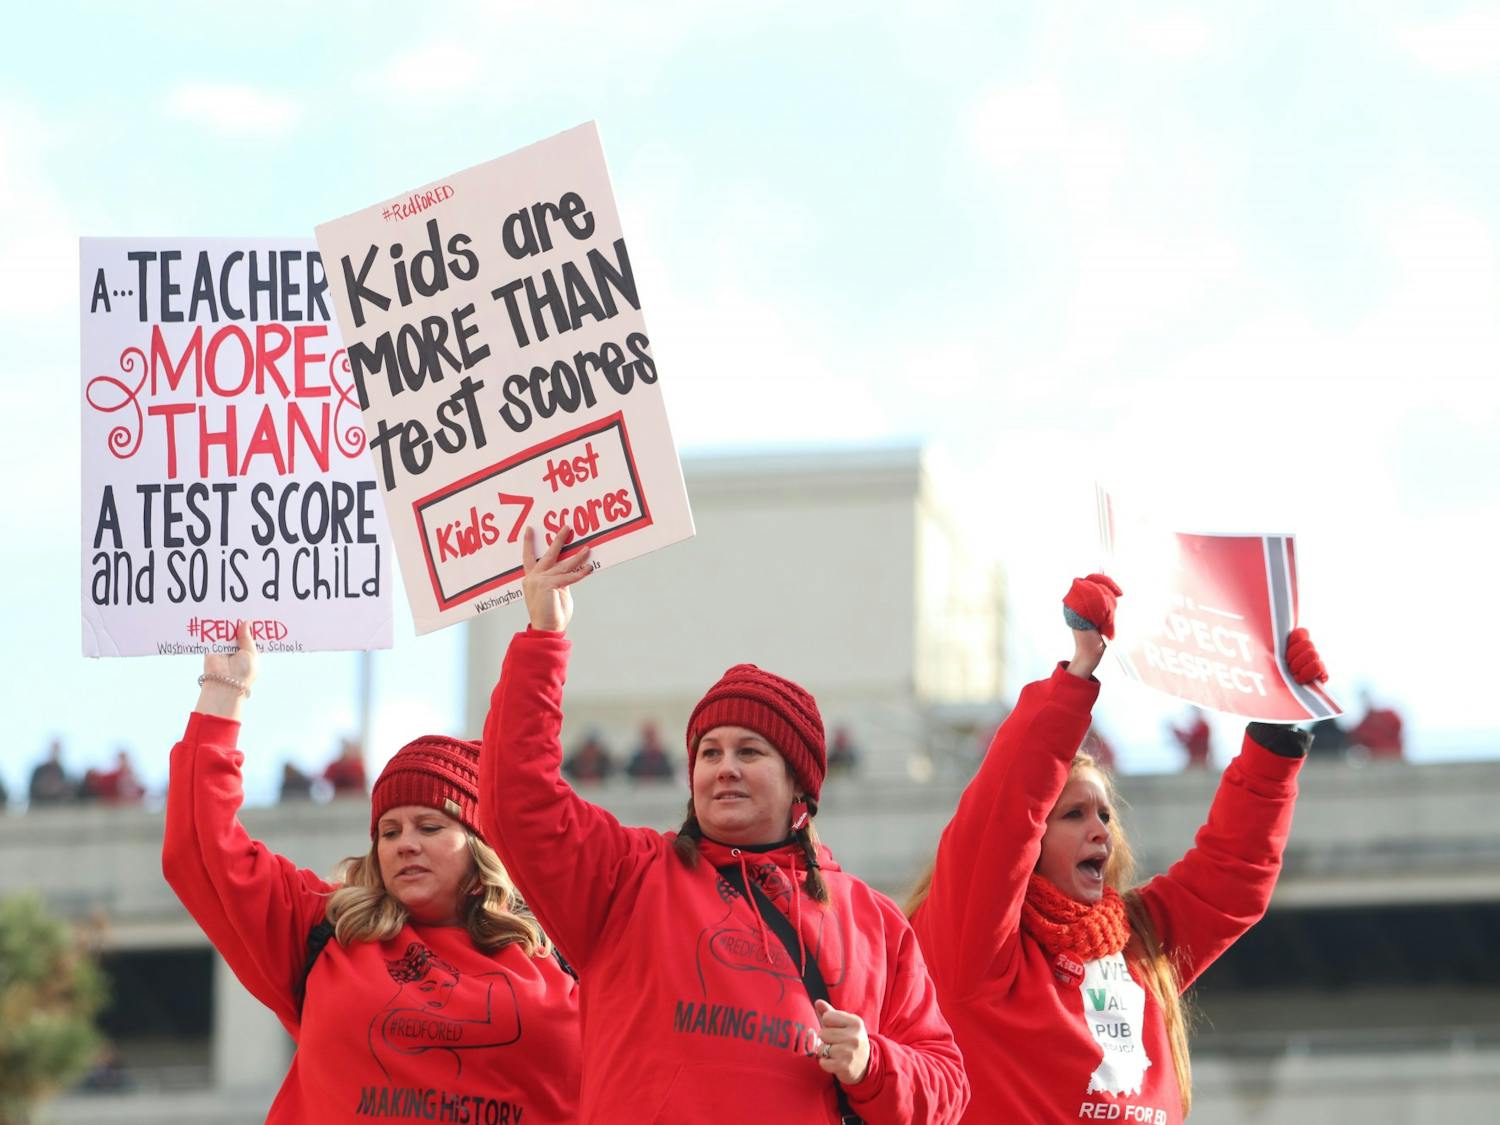 GALLERY: Teachers descend on the Indiana Statehouse to protest for #RedForEd day